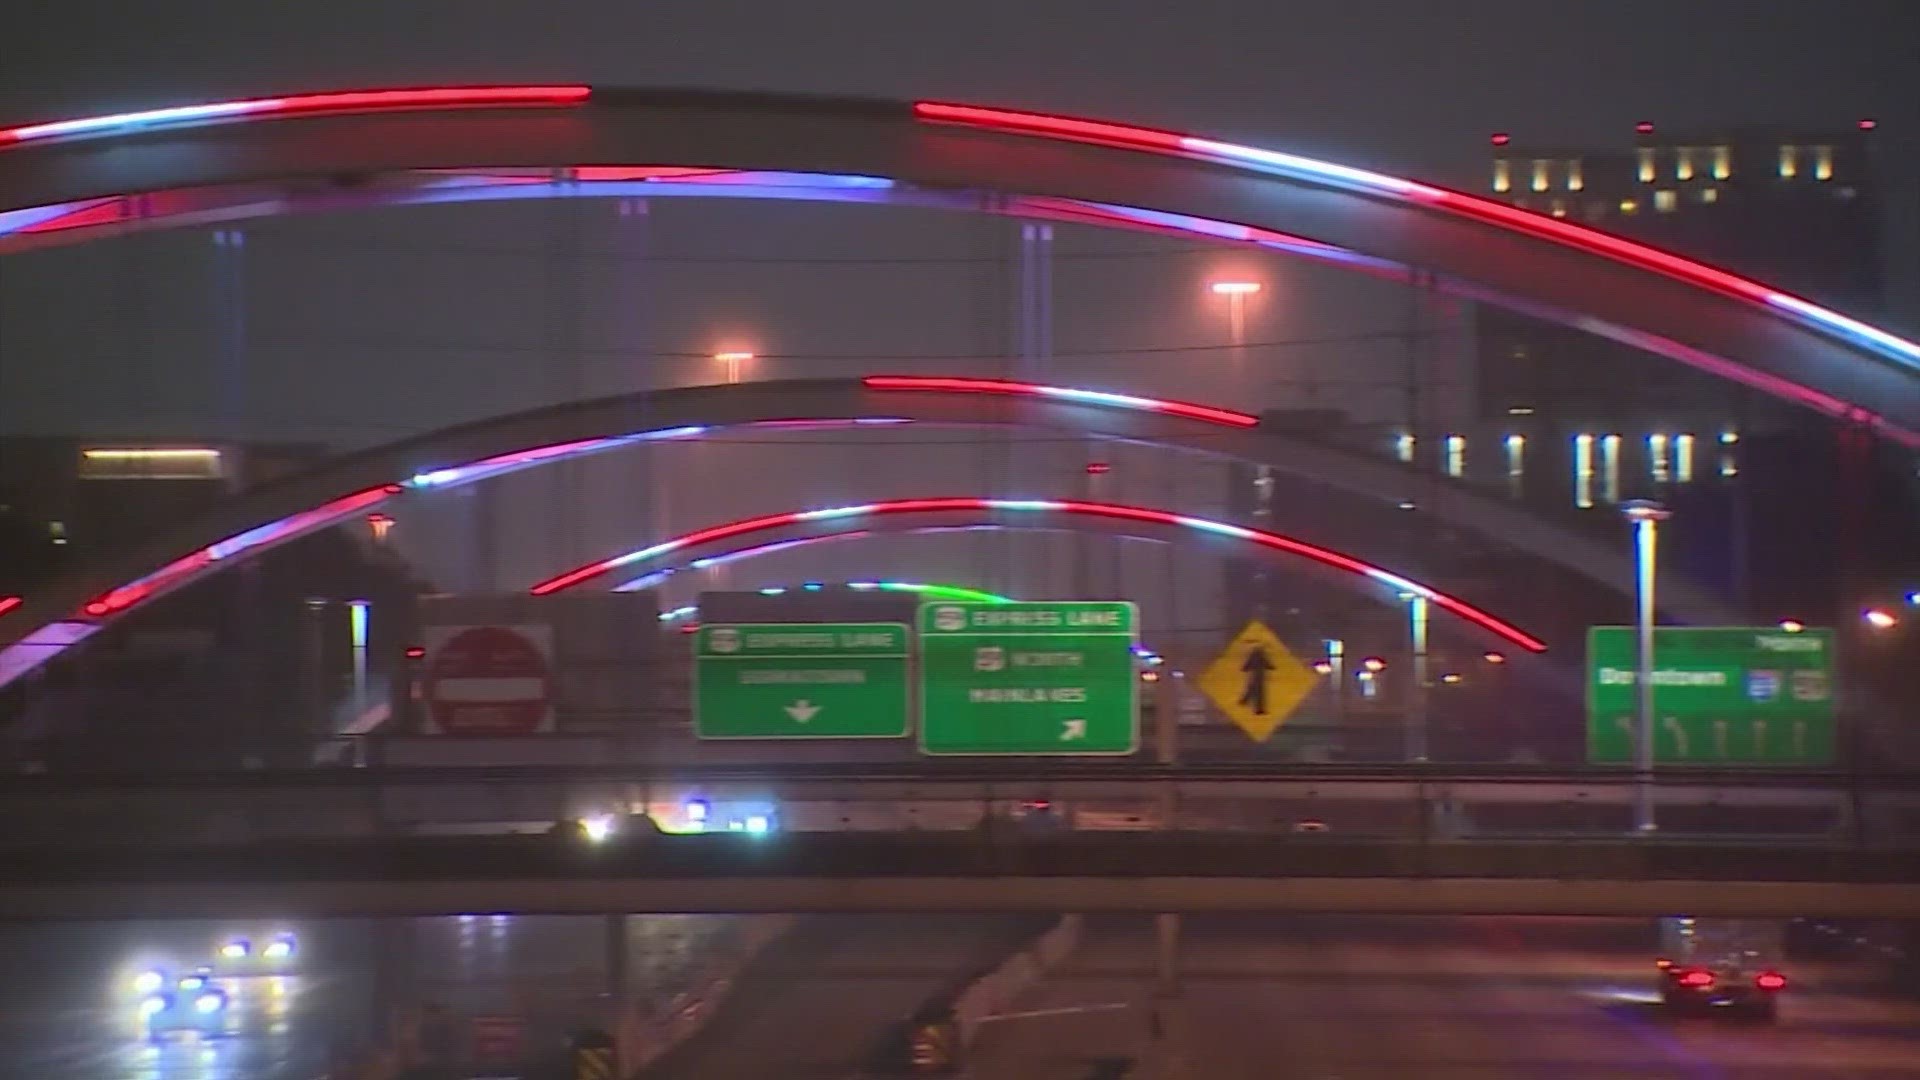 It's been a while since the colors have been on display, but Houston City Council said there's a plan in place to light up the bridges yet again.